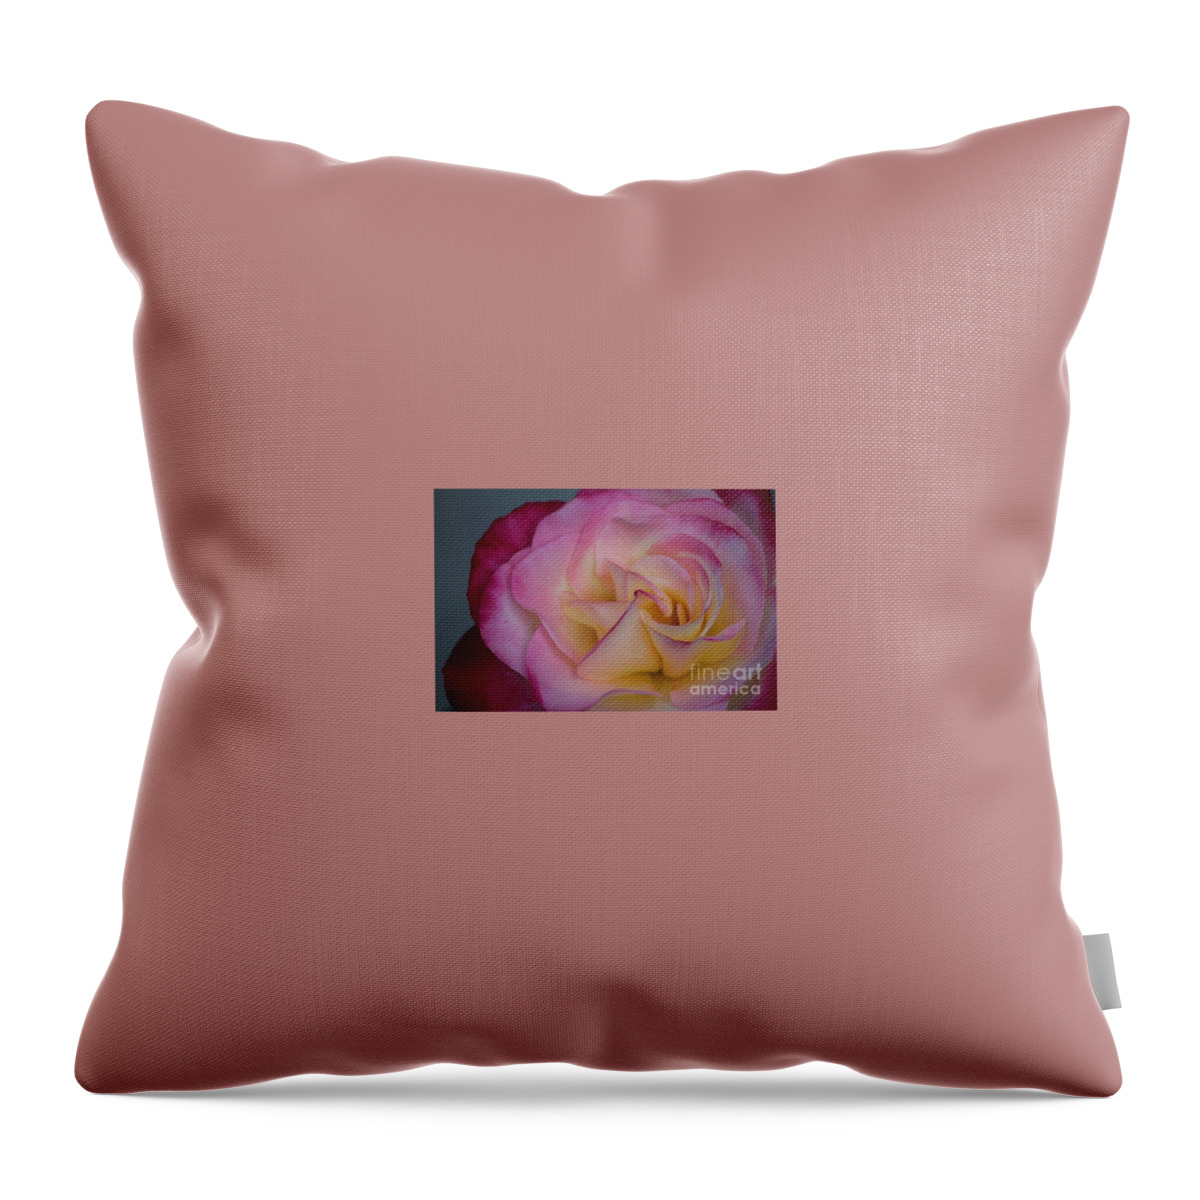 Rose Throw Pillow featuring the photograph Rose by Deena Withycombe